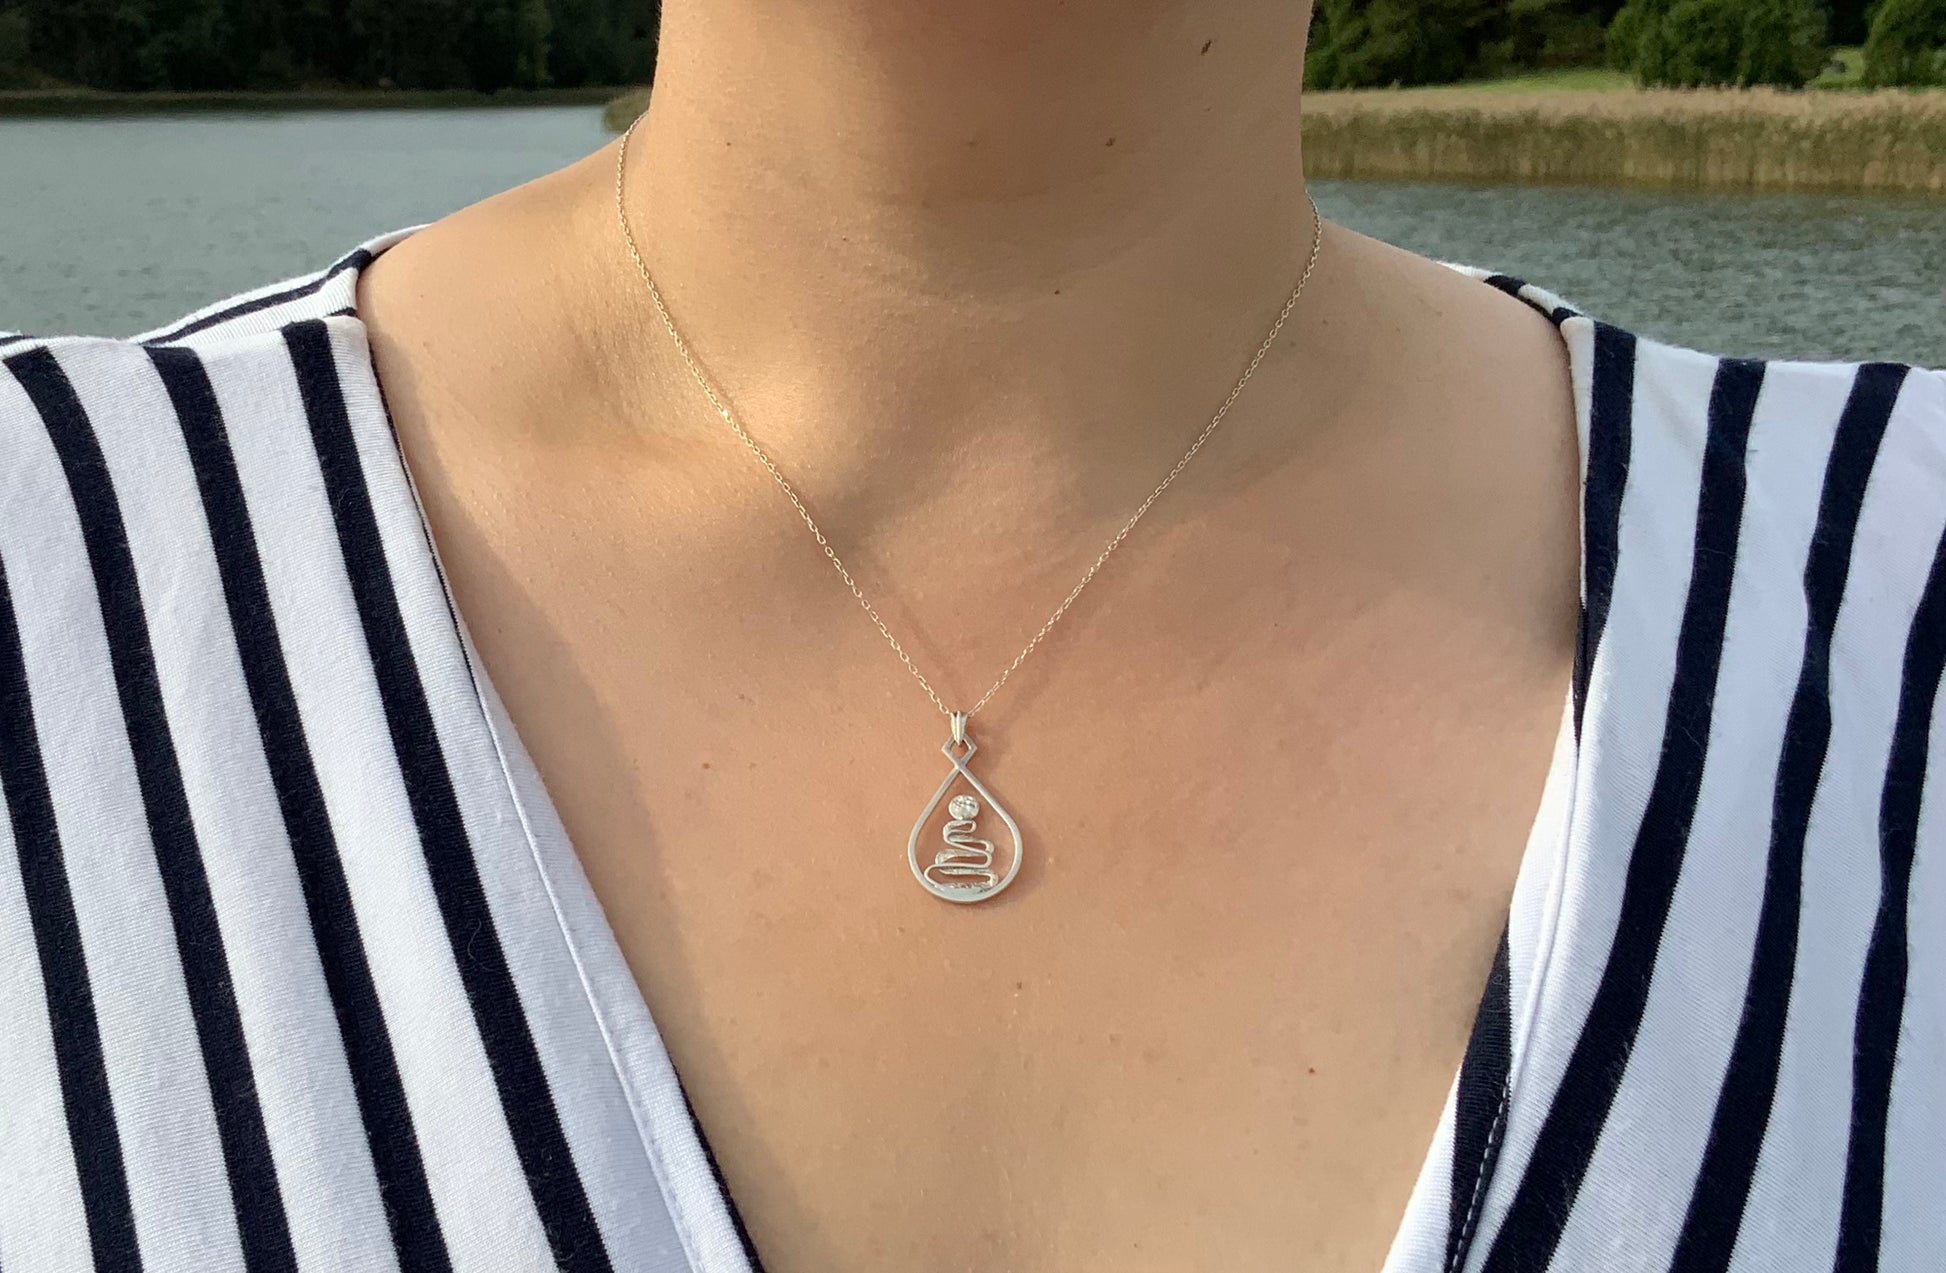 Moon river necklace